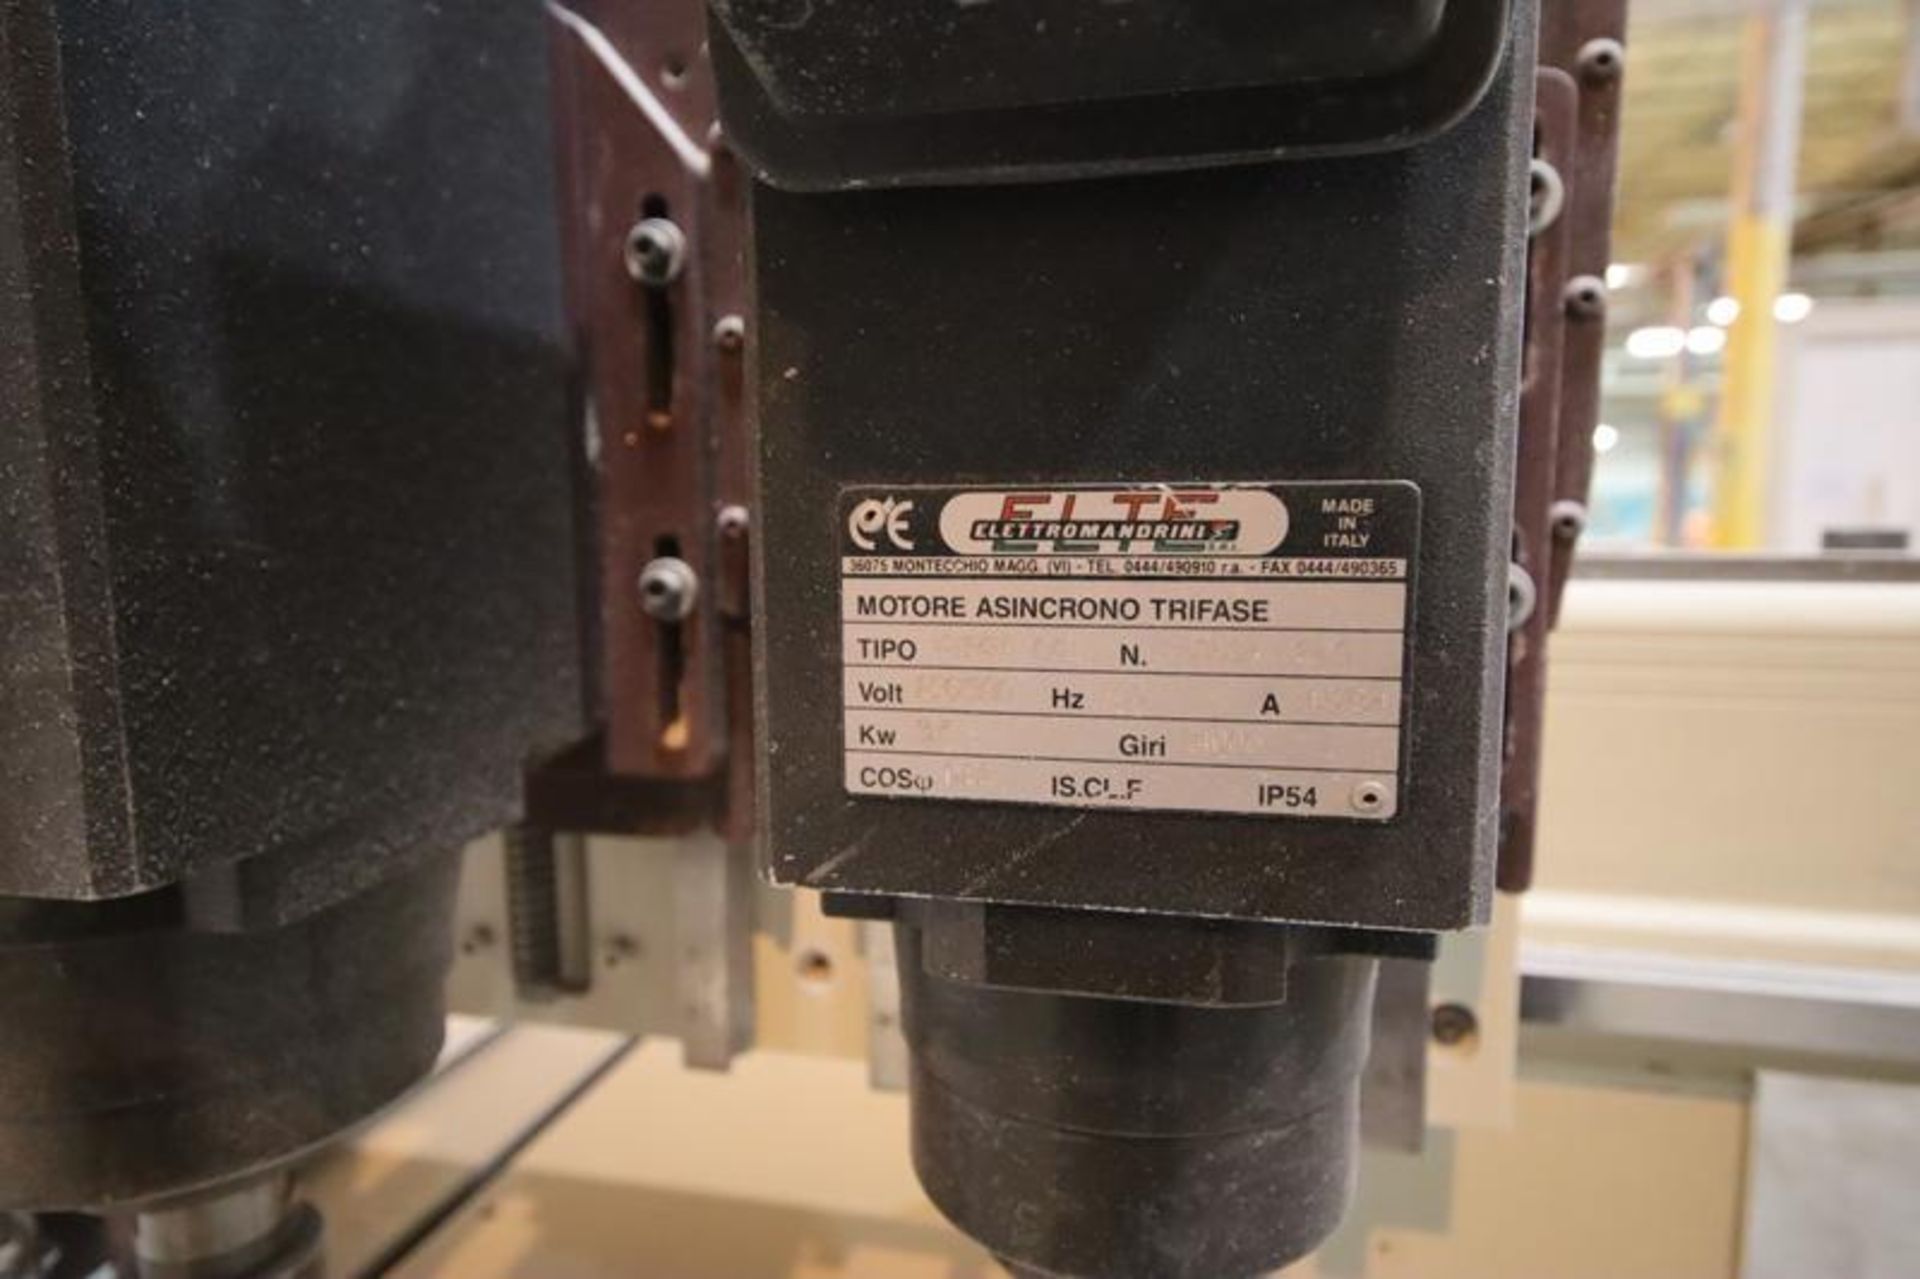 AXYZ Automation Inc. series 7012 router. S/N 0000-0784, equipped with (2) Elettromandrini cutting he - Image 4 of 6